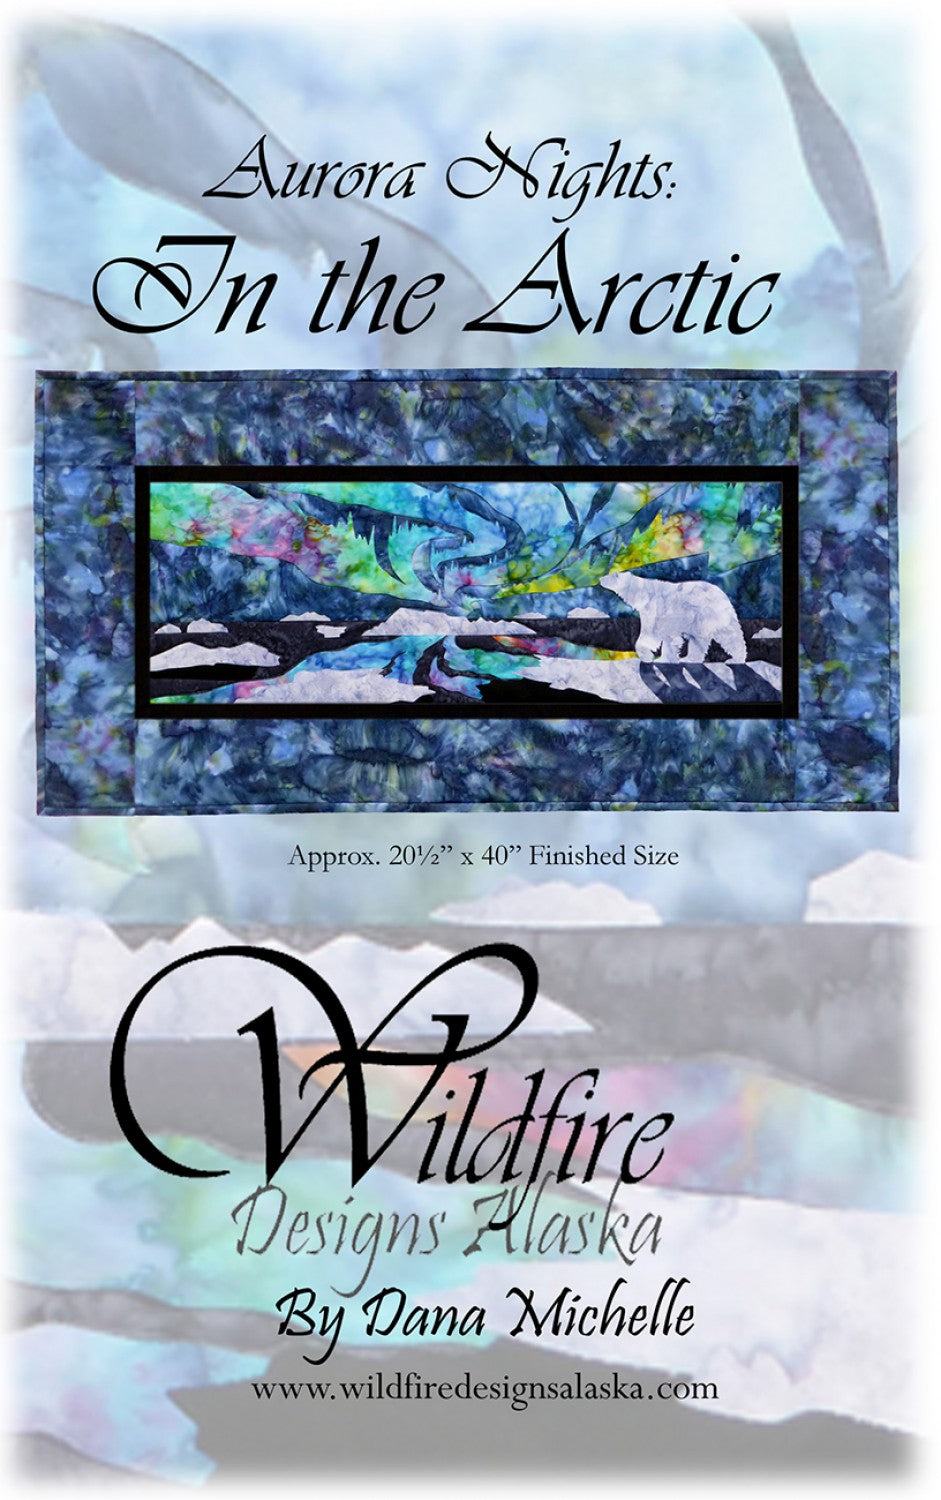 Wildfire Designs Alaska Aurora Nights In the Arctic Laser Cut Applique Quilt Kit Front Cover